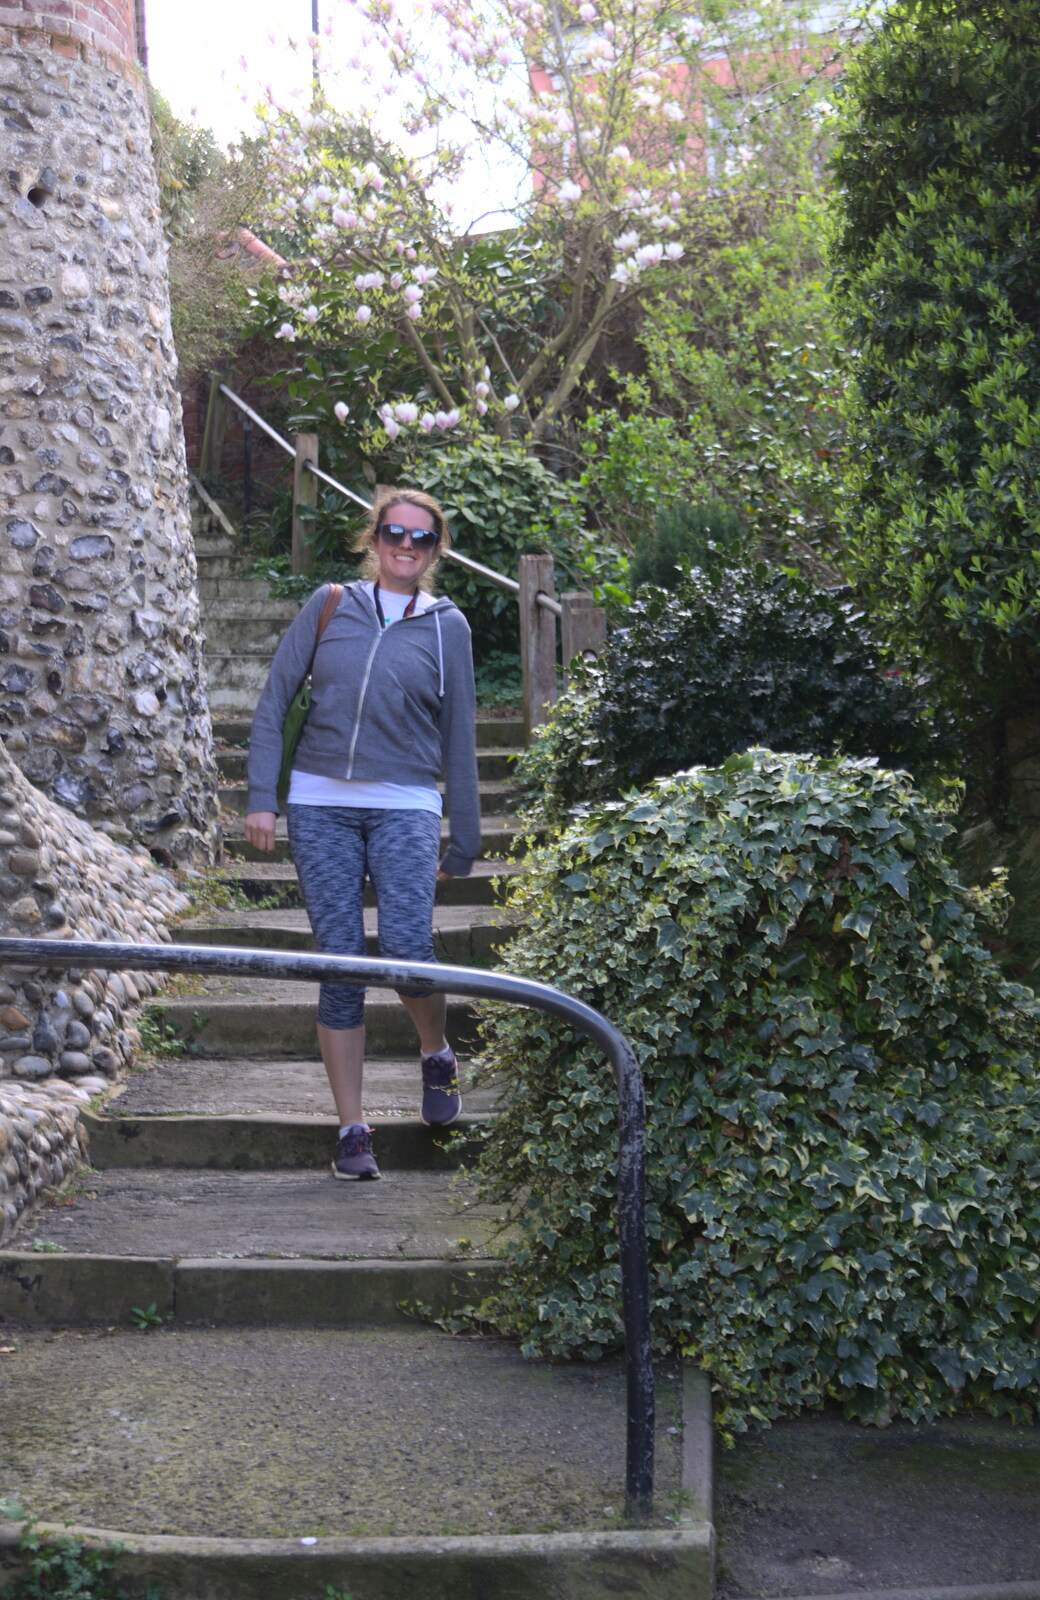 Isobel, with a gammy leg, walks down the steps from A Postcard from Beccles, Suffolk - 2nd April 2017